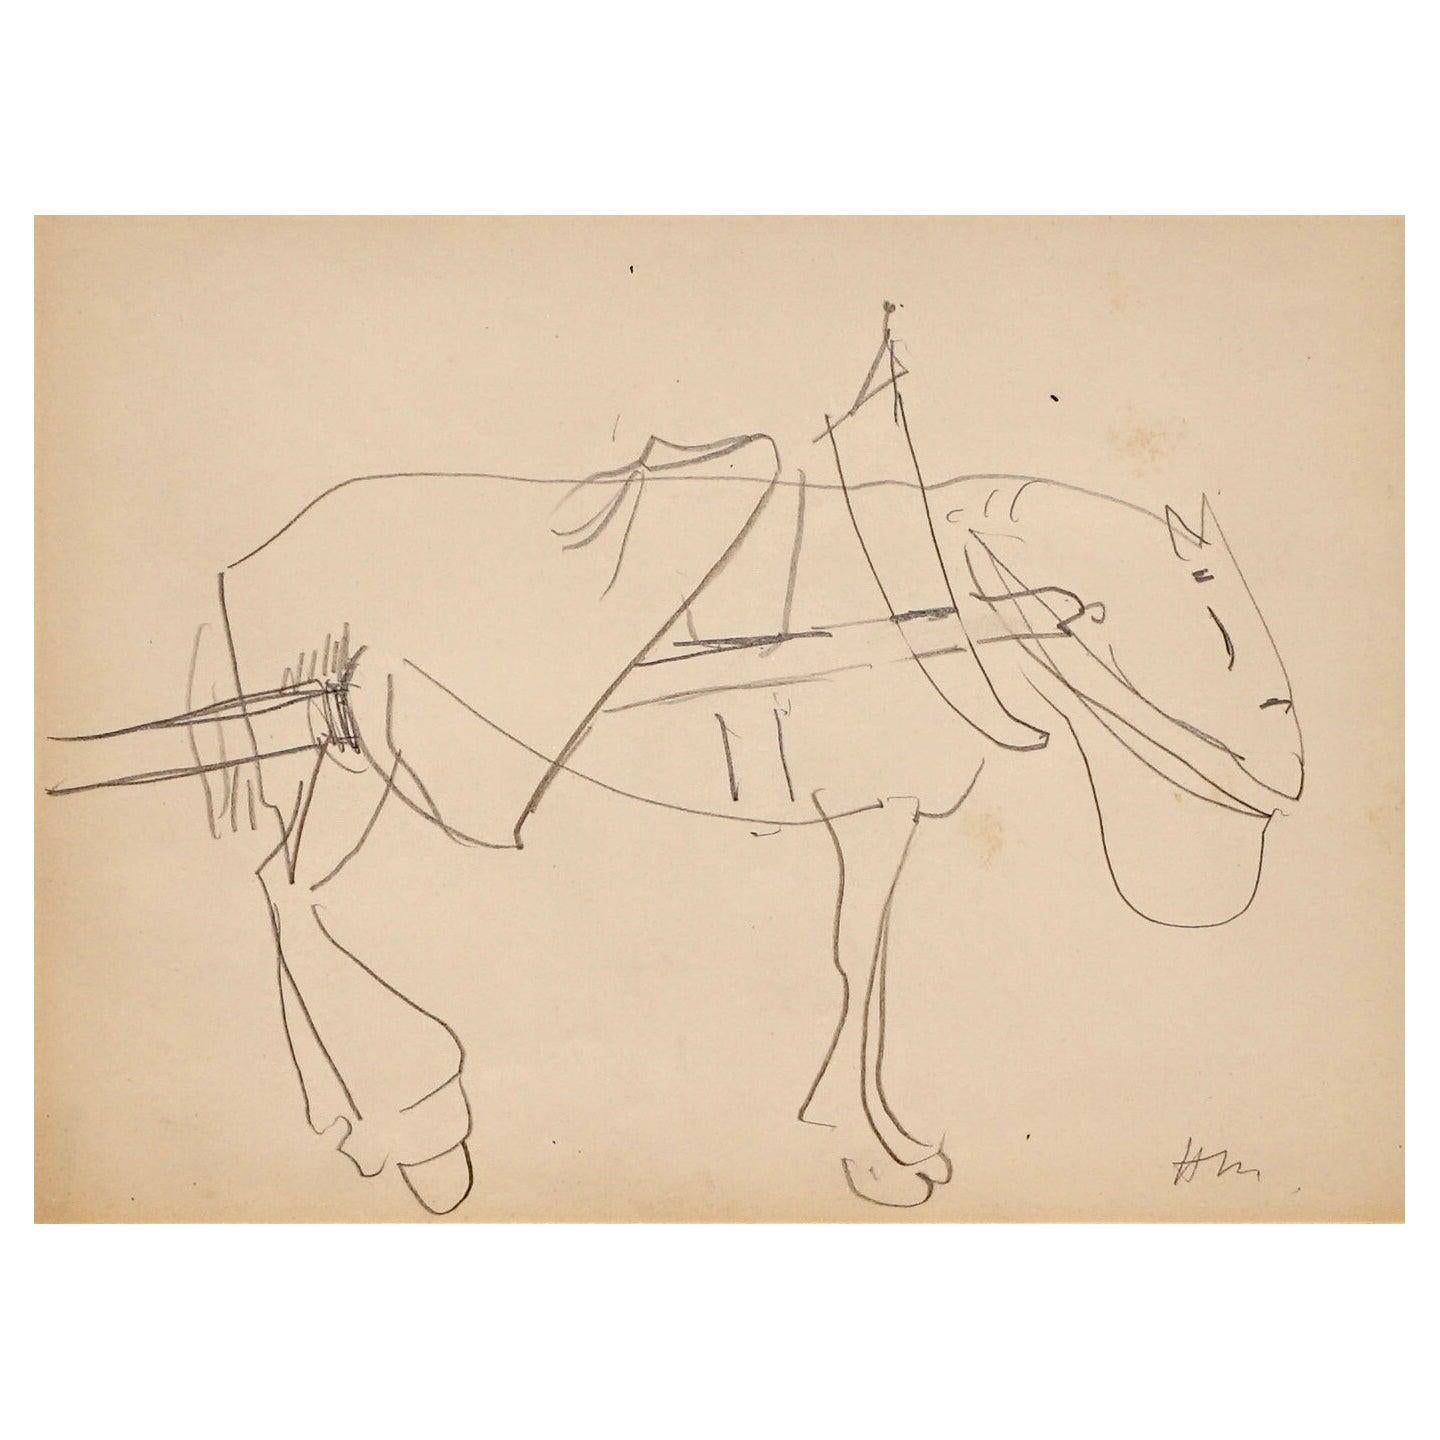 Henri Matisse (French 1869-1954) Pencil Drawing Of A Working Horse Catalogued as Number Z 548 in the Artist Archives

Pencil on paper, c. 1900, signed with initials 'HM' lower right.

Sheet: 9 3/8 x 11 3/4 in. 
Framed: 21.5 x 24.75 Museum Frame and